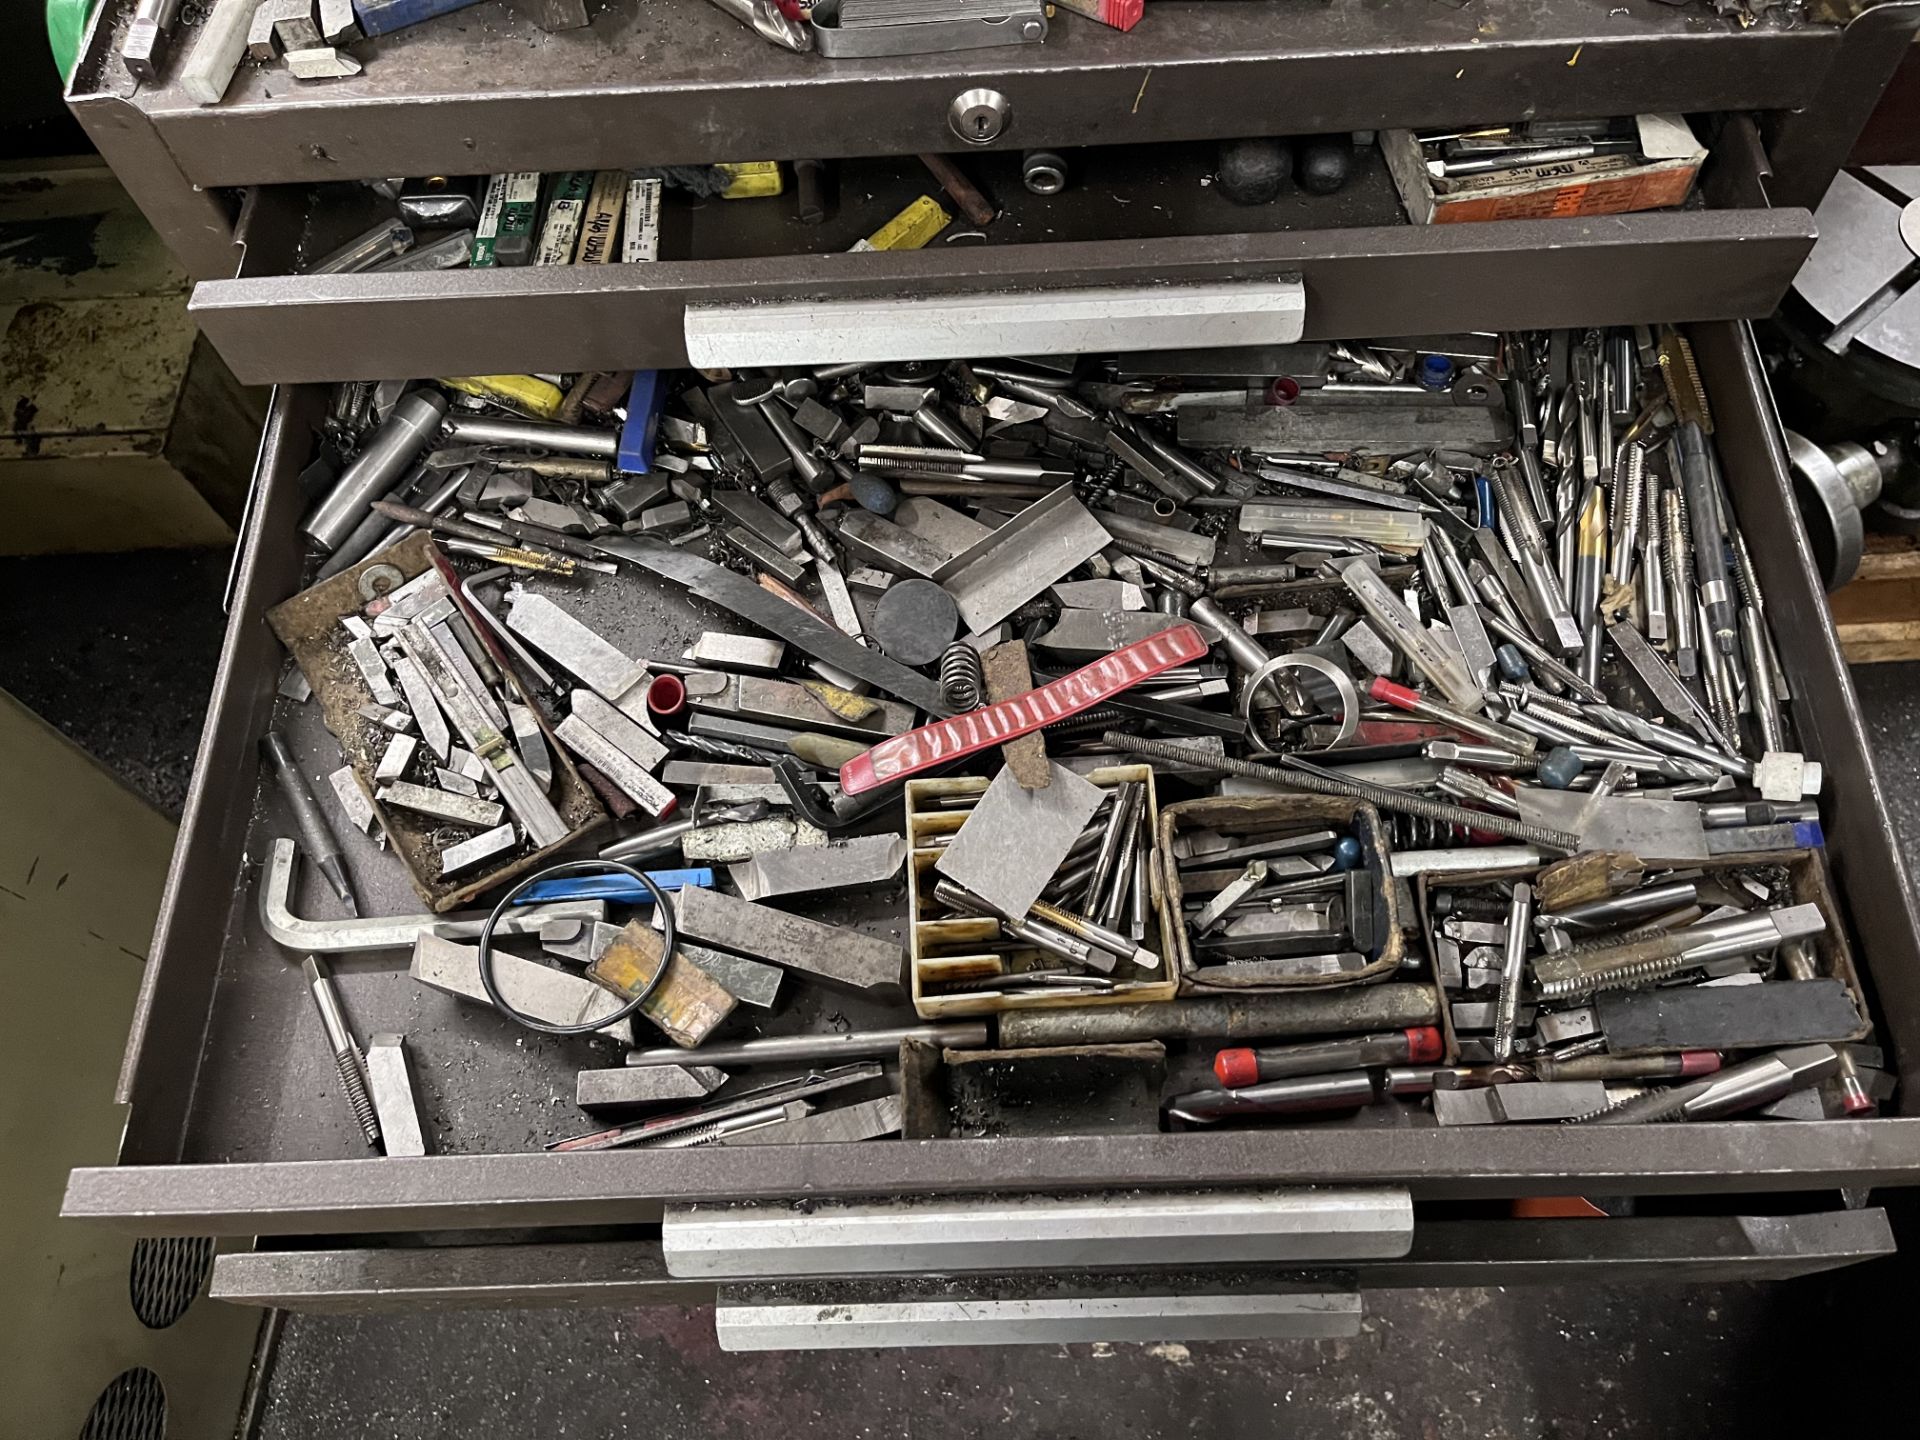 Tool Chest Full of Tools - Image 3 of 9